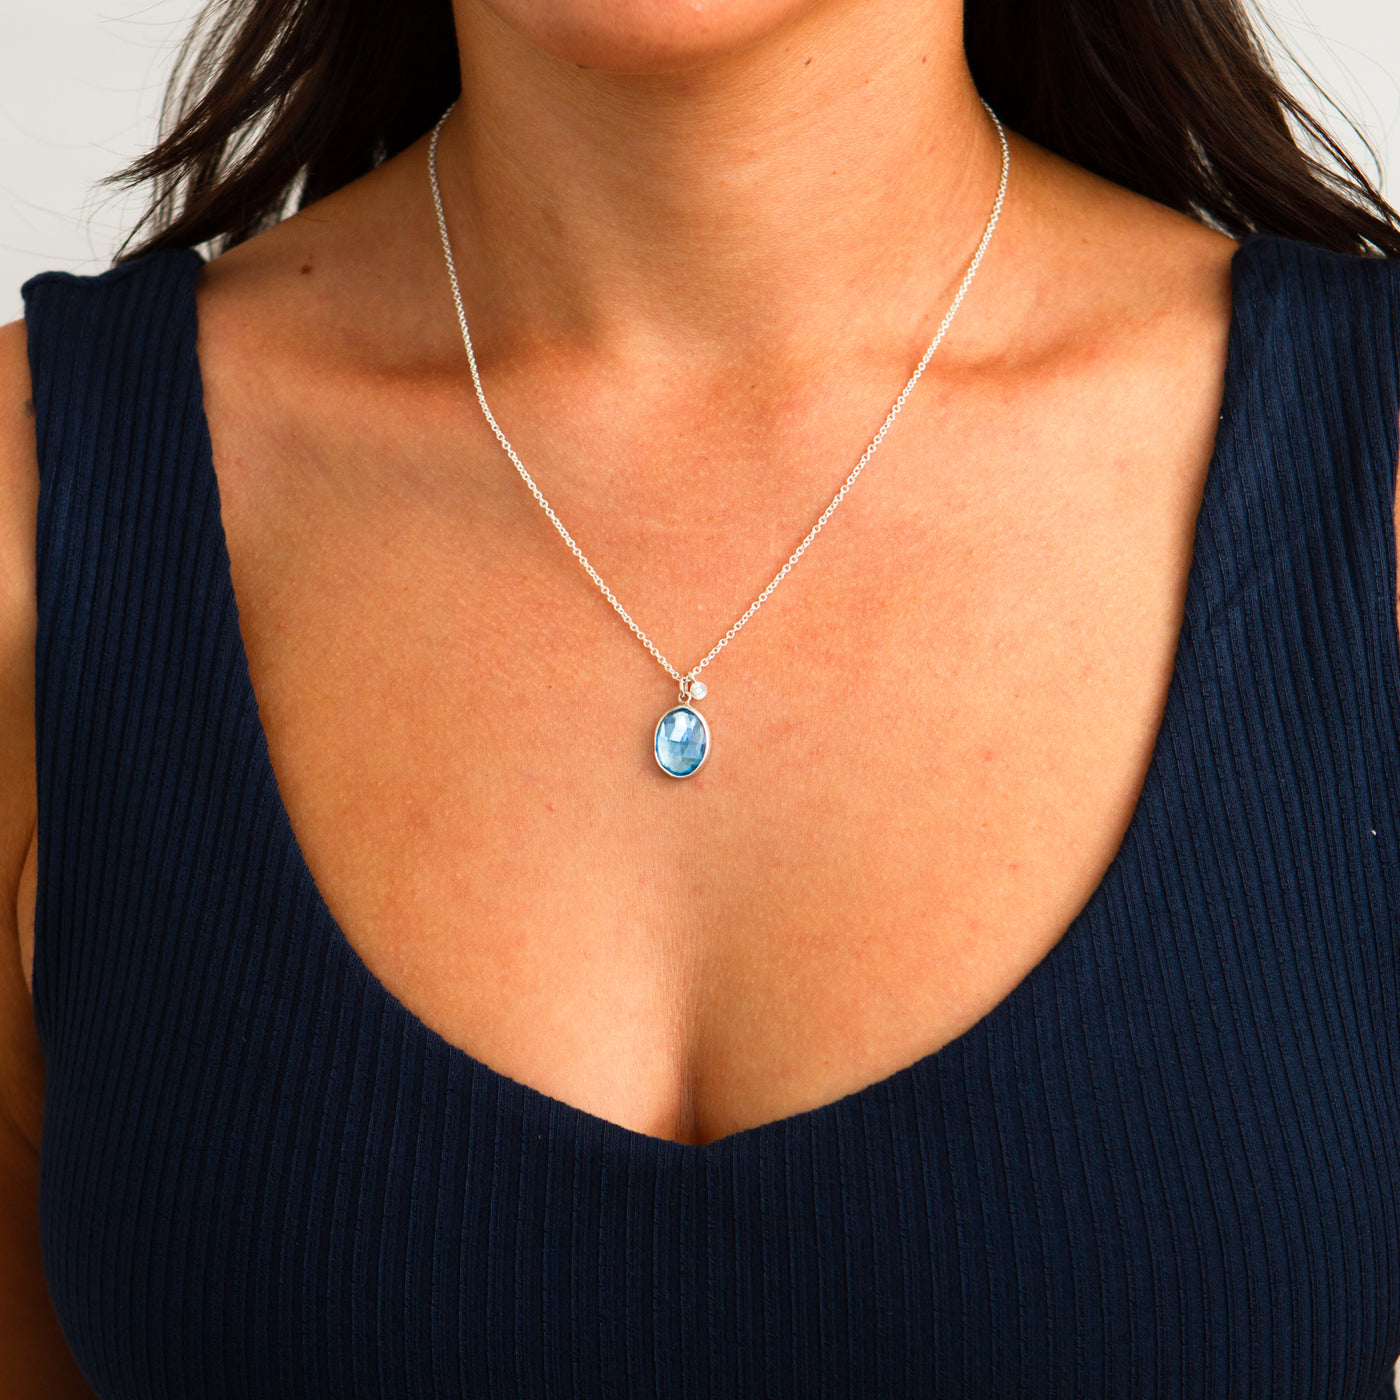 Rose Cut Swiss Blue Topaz Silver Theia Necklace #2 on a model